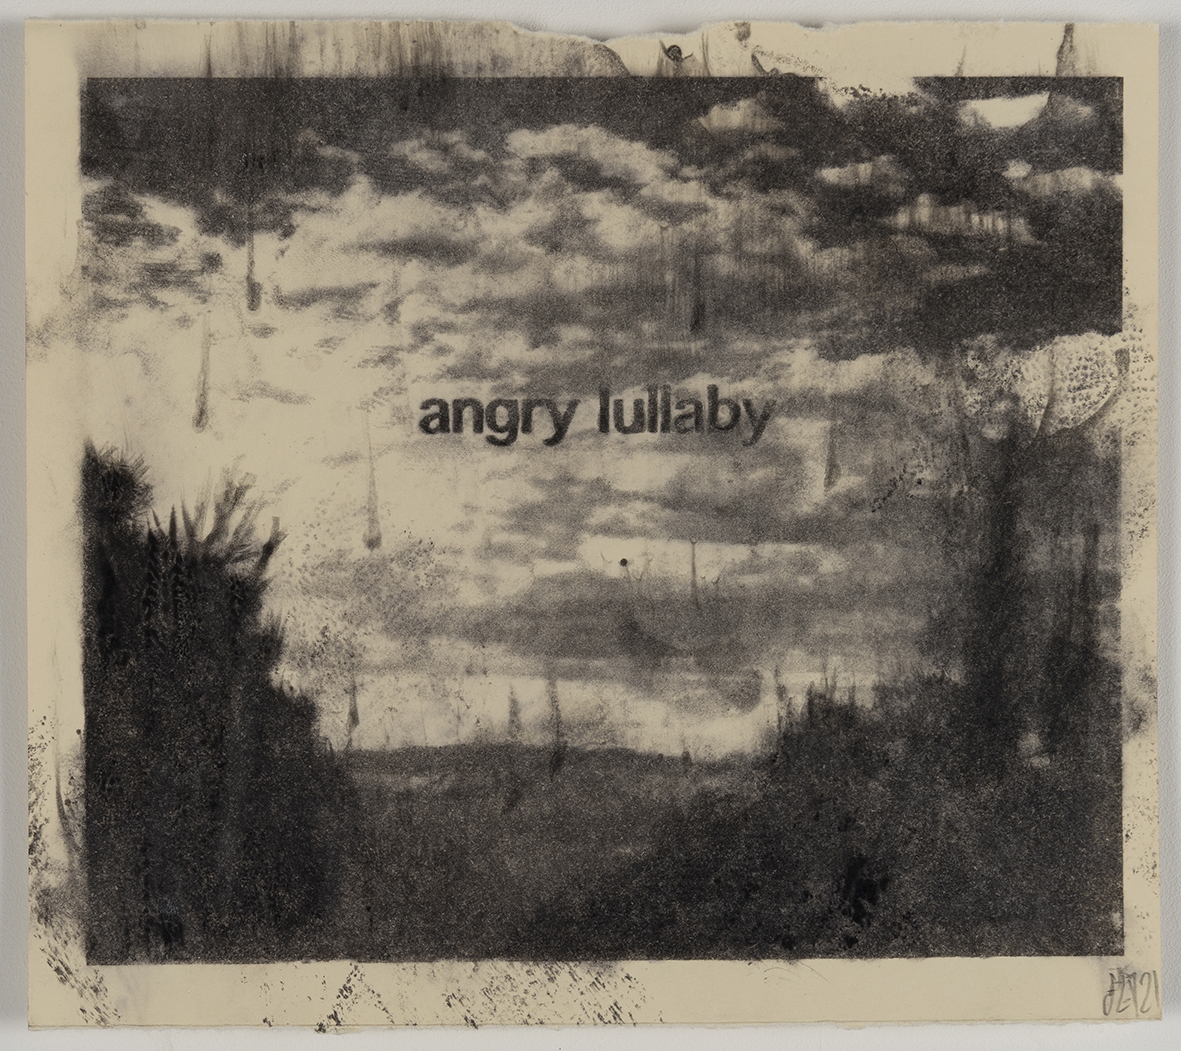 Angry lullaby, 2021